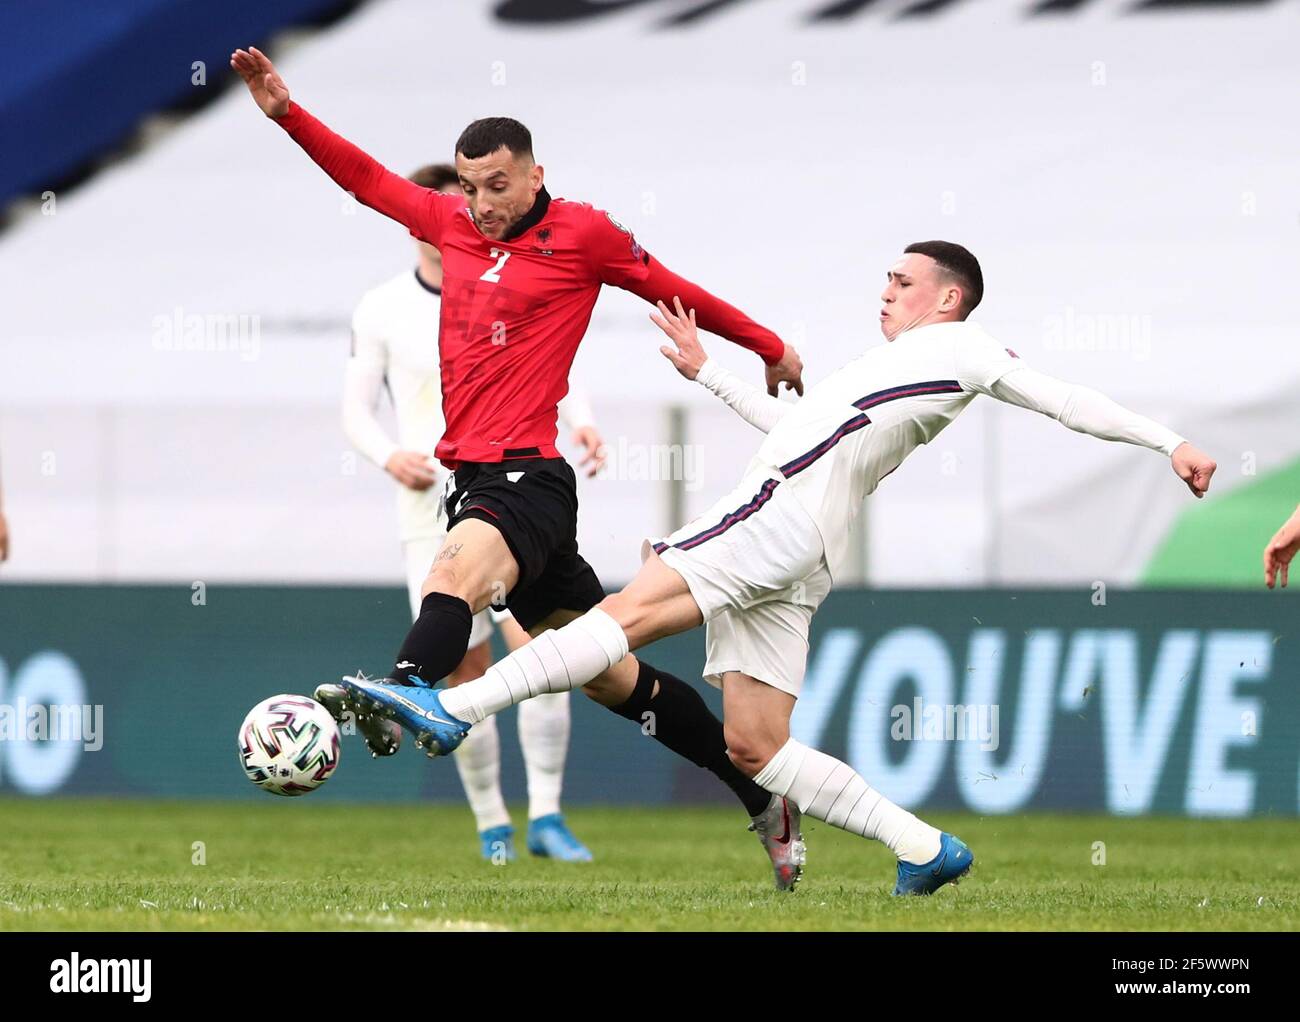 Soccer Football - World Cup Qualifiers Europe - Group I - Albania v England - Arena Kombetare, Tirana, Albania - March 28, 2021 England's Phil Foden in action with Albania's Hysen Memolla REUTERS/Marko Djurica Stock Photo